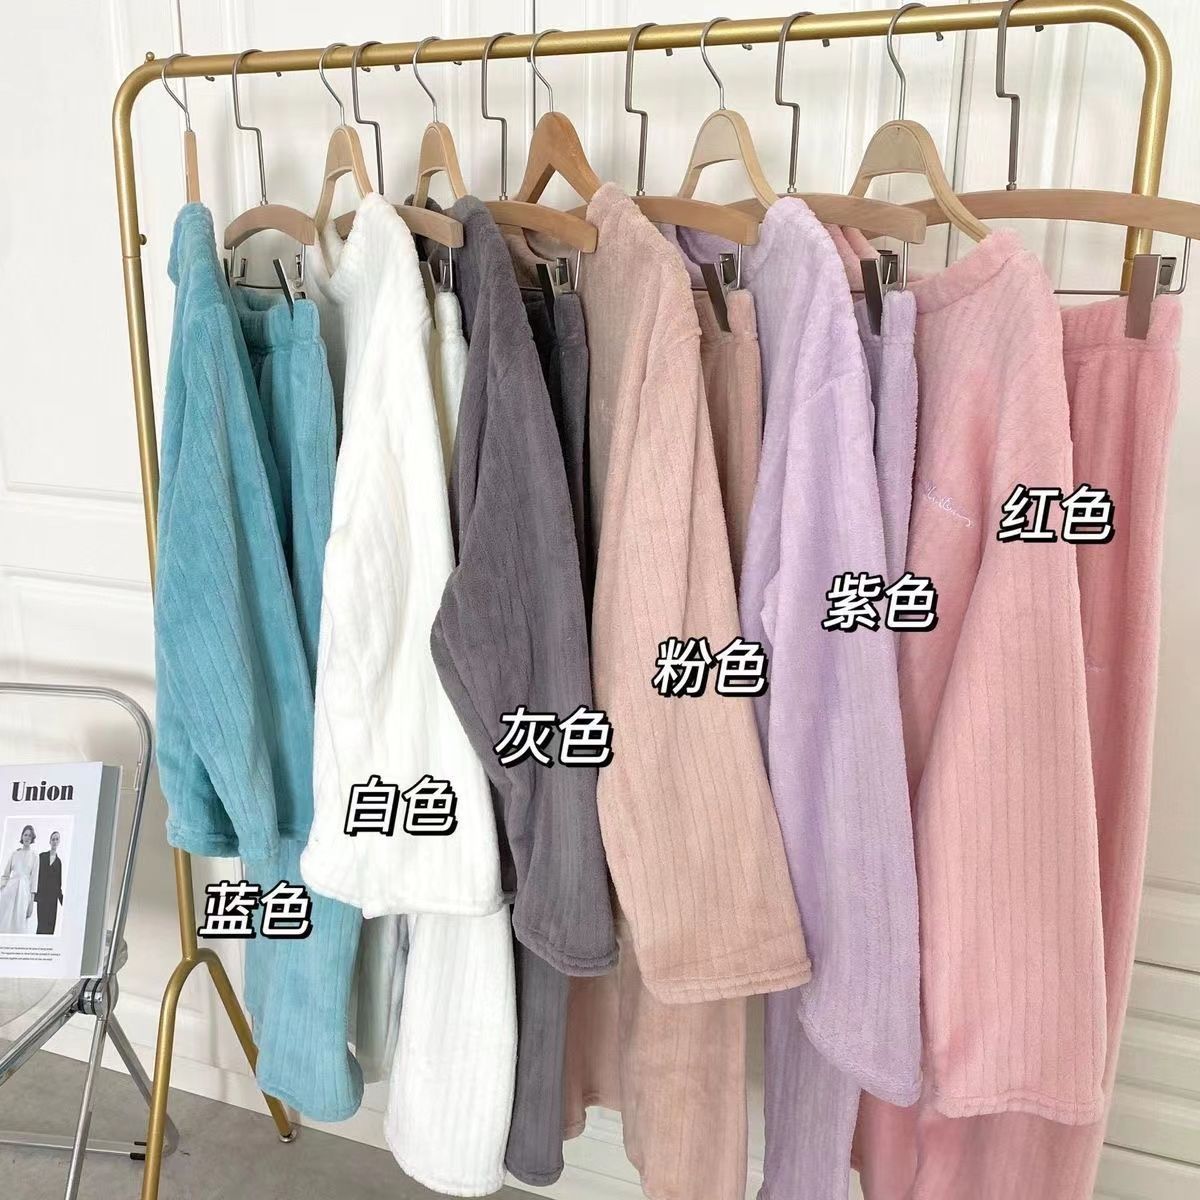  autumn and winter new coral fleece pajamas women's thickened student cute casual home clothes Crescent City warm suit